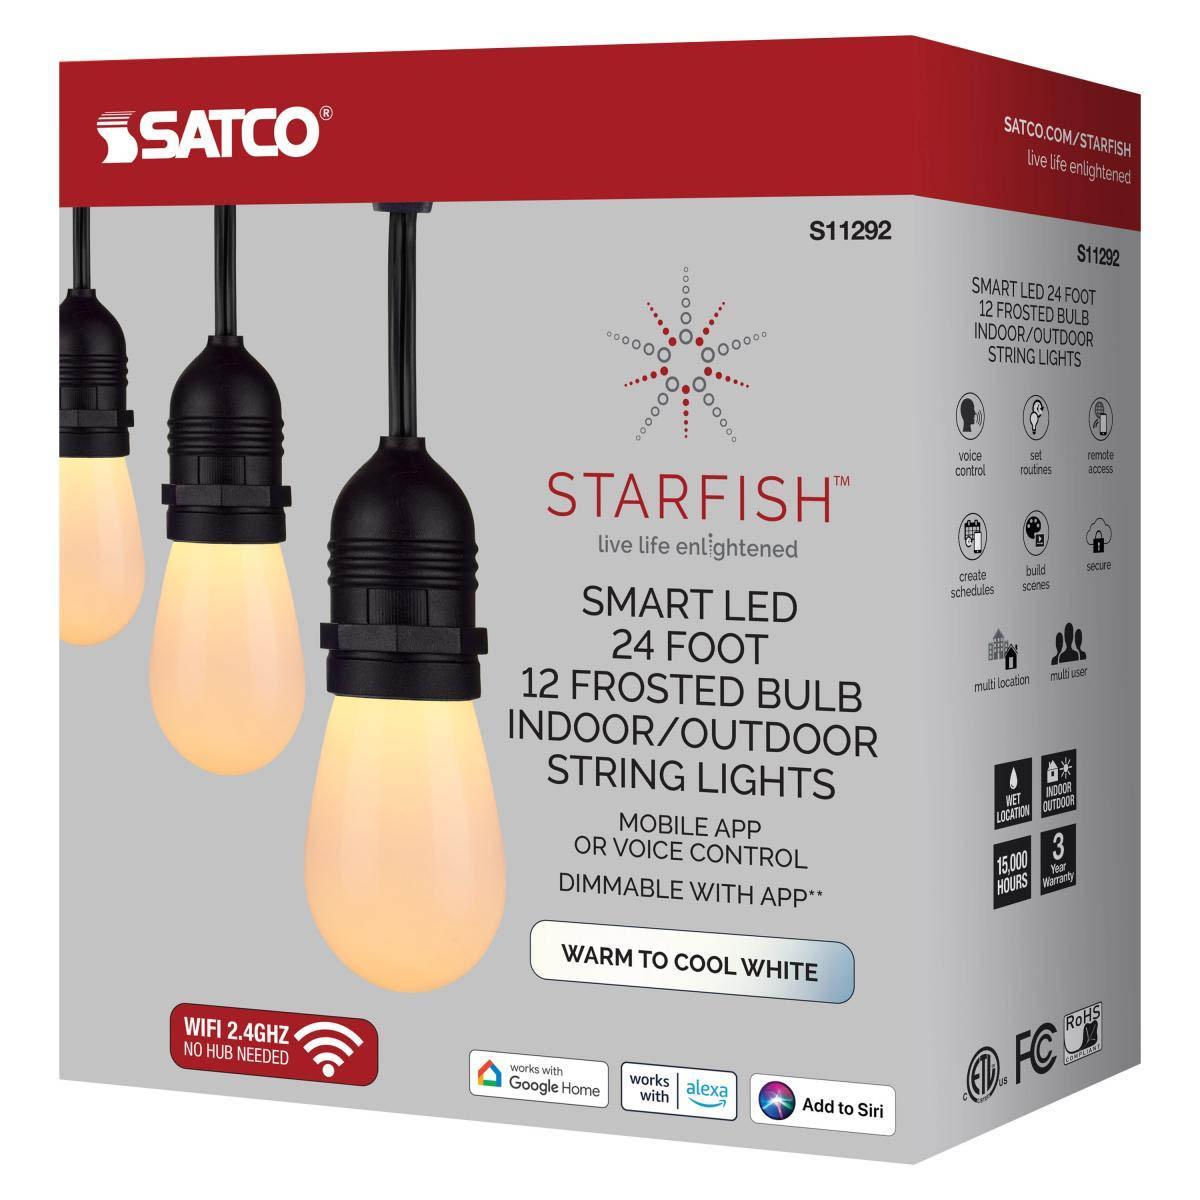 Starfish Wi Fi smart LED indoor/outdoor string light, Tunable White, 24 Feet, 12 Frosted Bulb